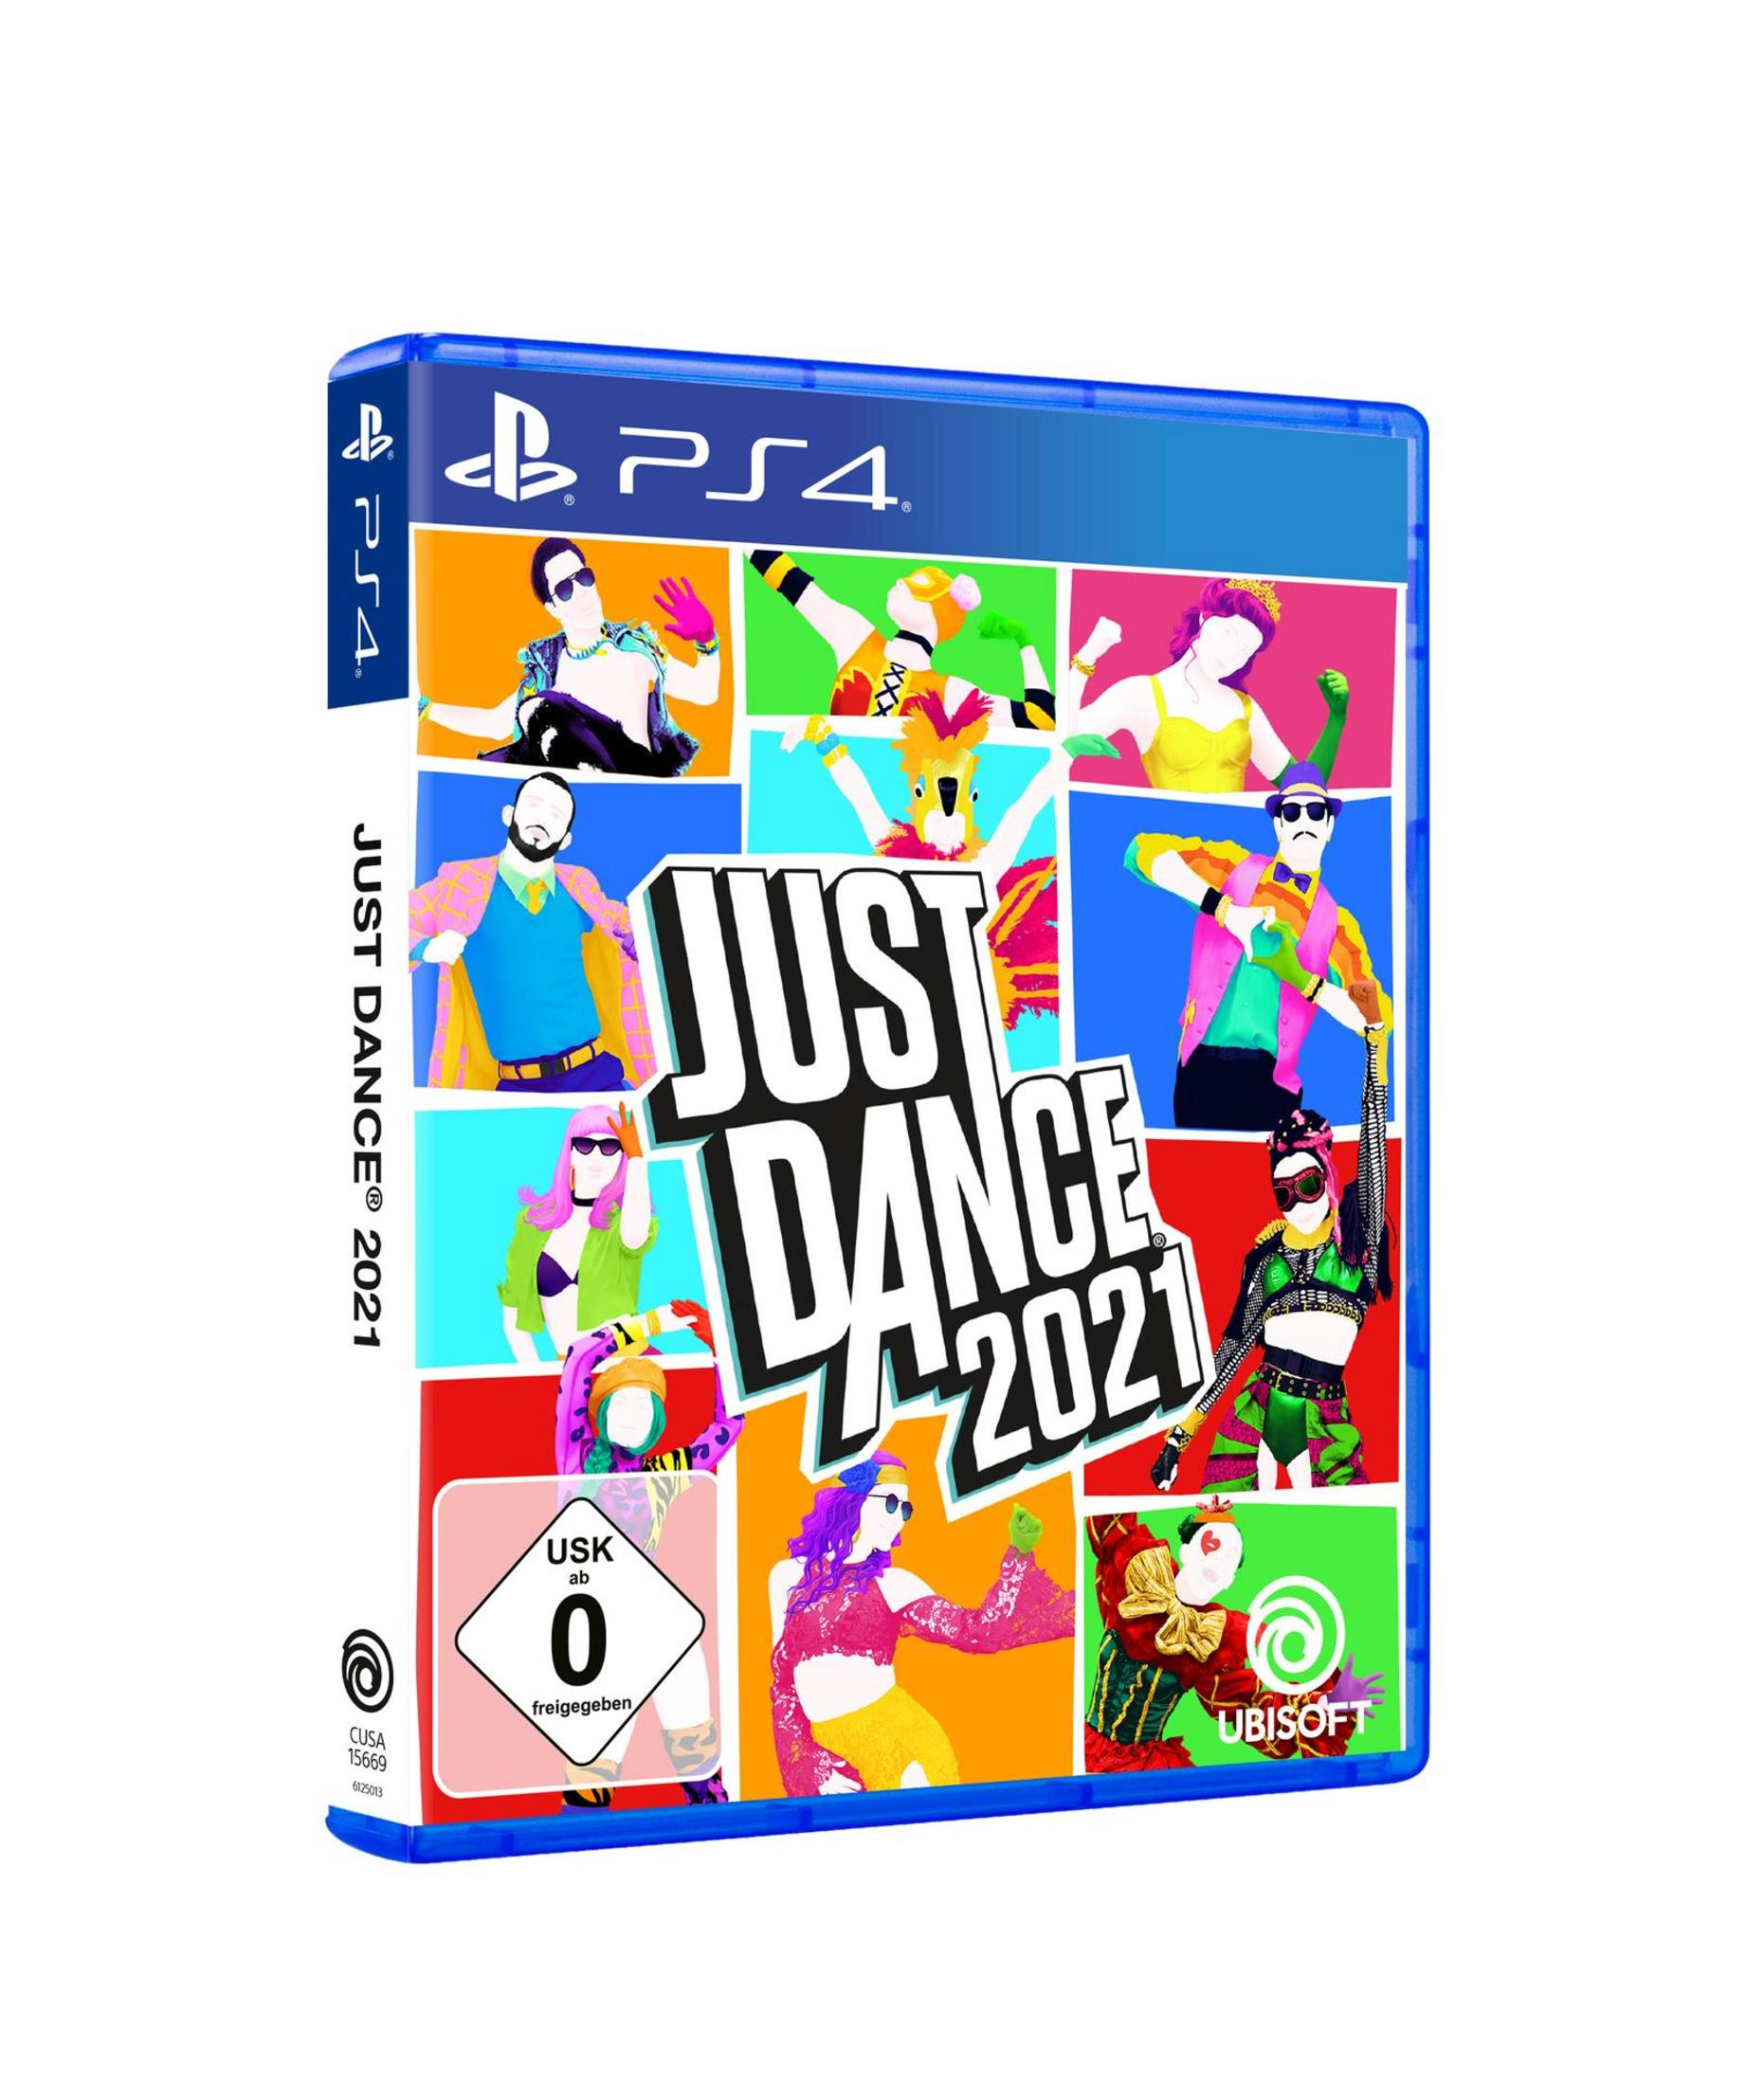 2021 Dance Just 4] PS-4 - [PlayStation